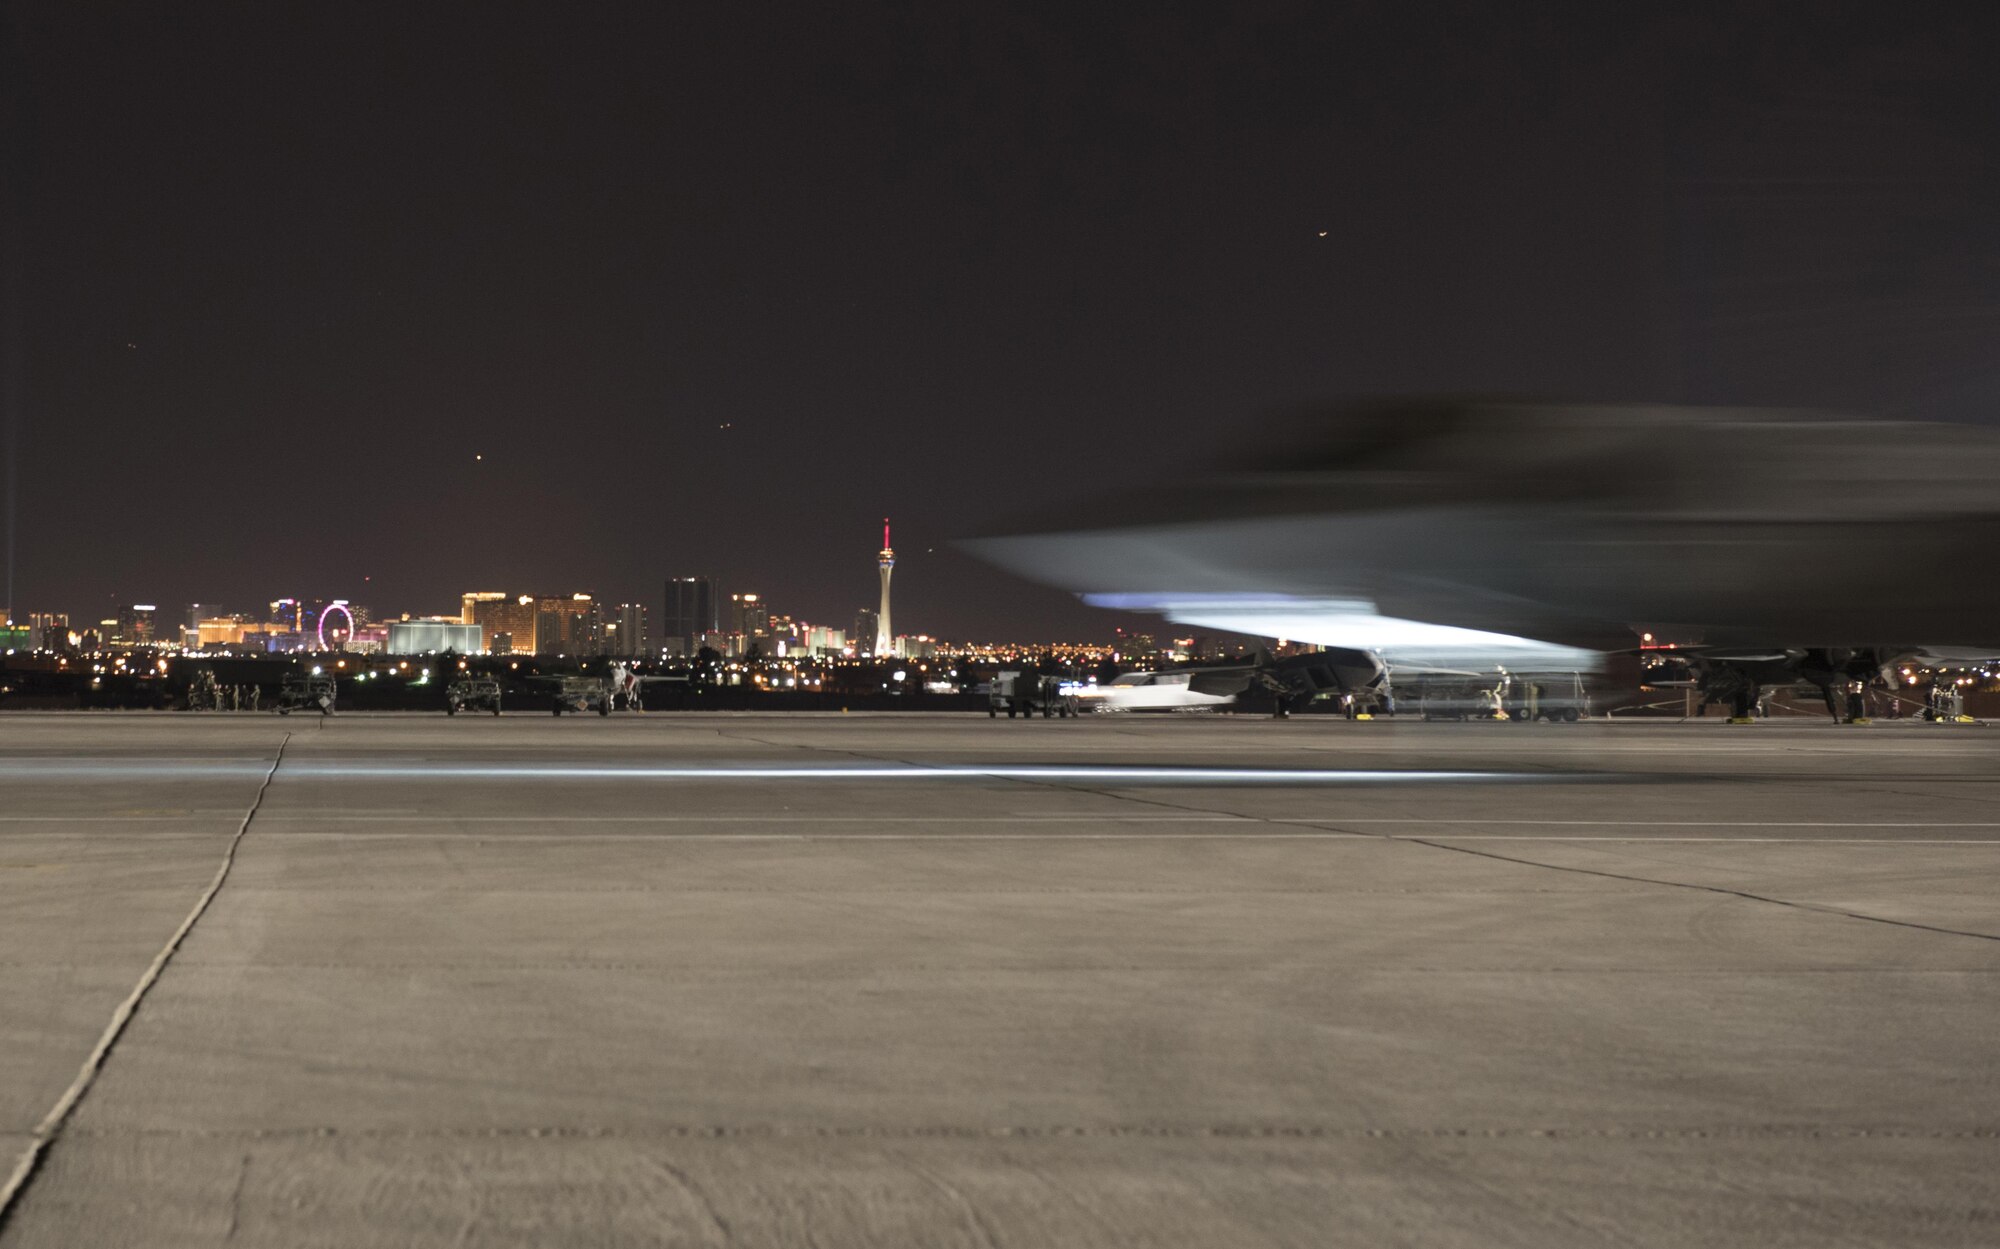 An F-35A Lightning II taxis before takeoff July 18, 2017, at Nellis Air Force Base, Nev. The 33rd Fighter Wing and Marine Attack Squadron 221 from Yuma, Ariz., participated in the first combat exercise with Air Force F-35As and Marine Corps F-35Bs operating simultaneously during Red Flag 17-3. The large scale exercise, which was developed to provide pilots with critical experience in combat situations, enabled F-35 pilots to plan and train using the same tactics, techniques and procedures. (U.S. Air Force photo by Staff Sgt. Peter Thompson)